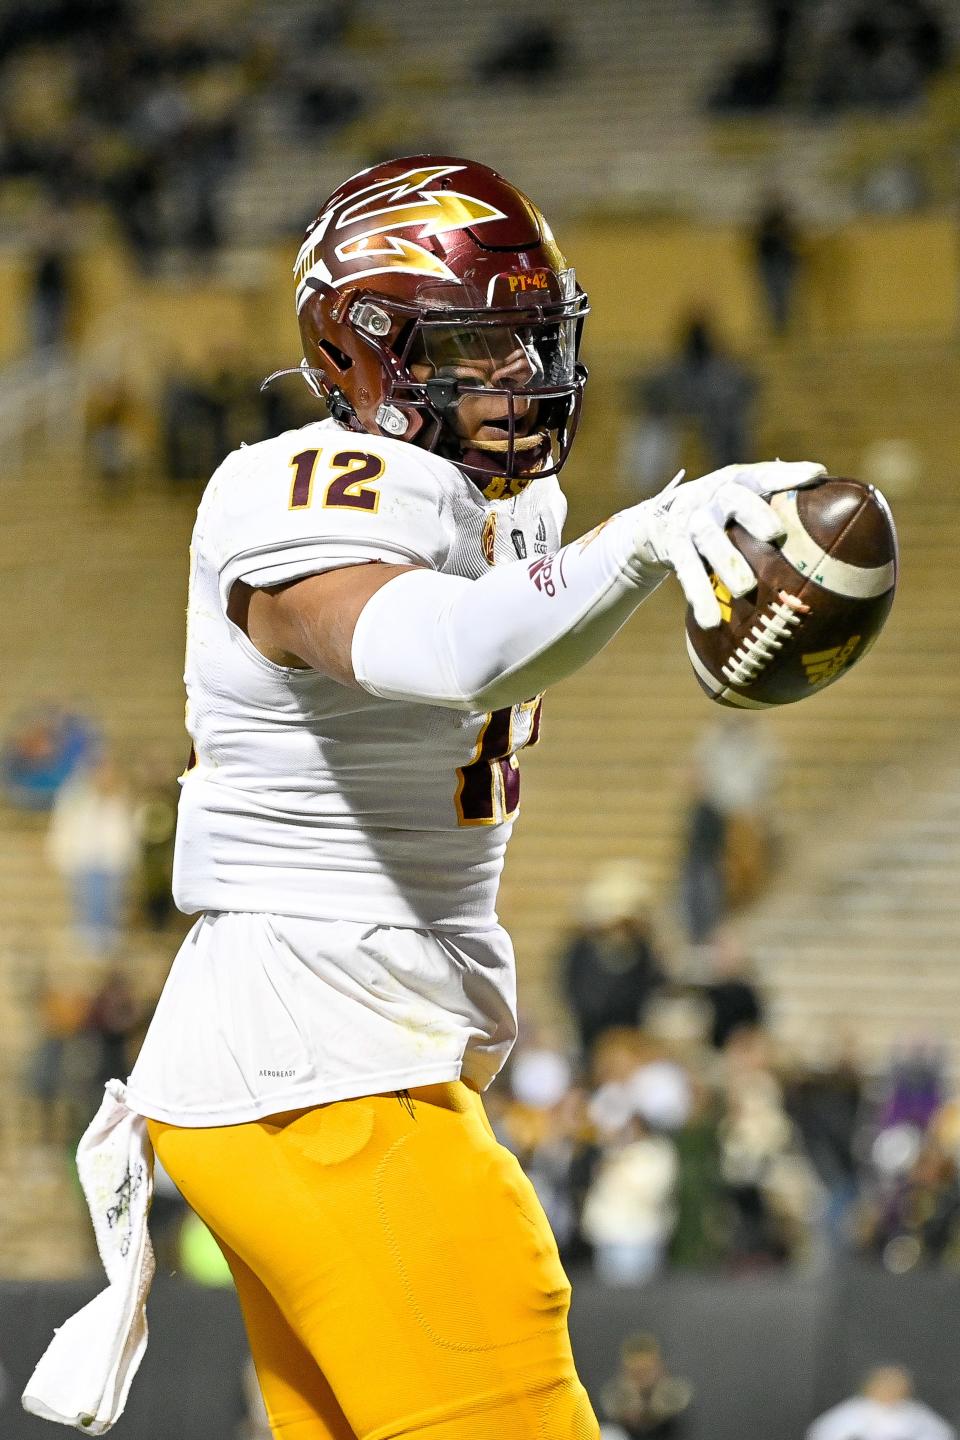 Tight end Jalin Conyers #12 of the Arizona State Sun Devils celebrates after a fourth quarter touchdown catch against the Colorado Buffaloes during the game at Folsom Field on October 29, 2022, in Boulder, Colorado.